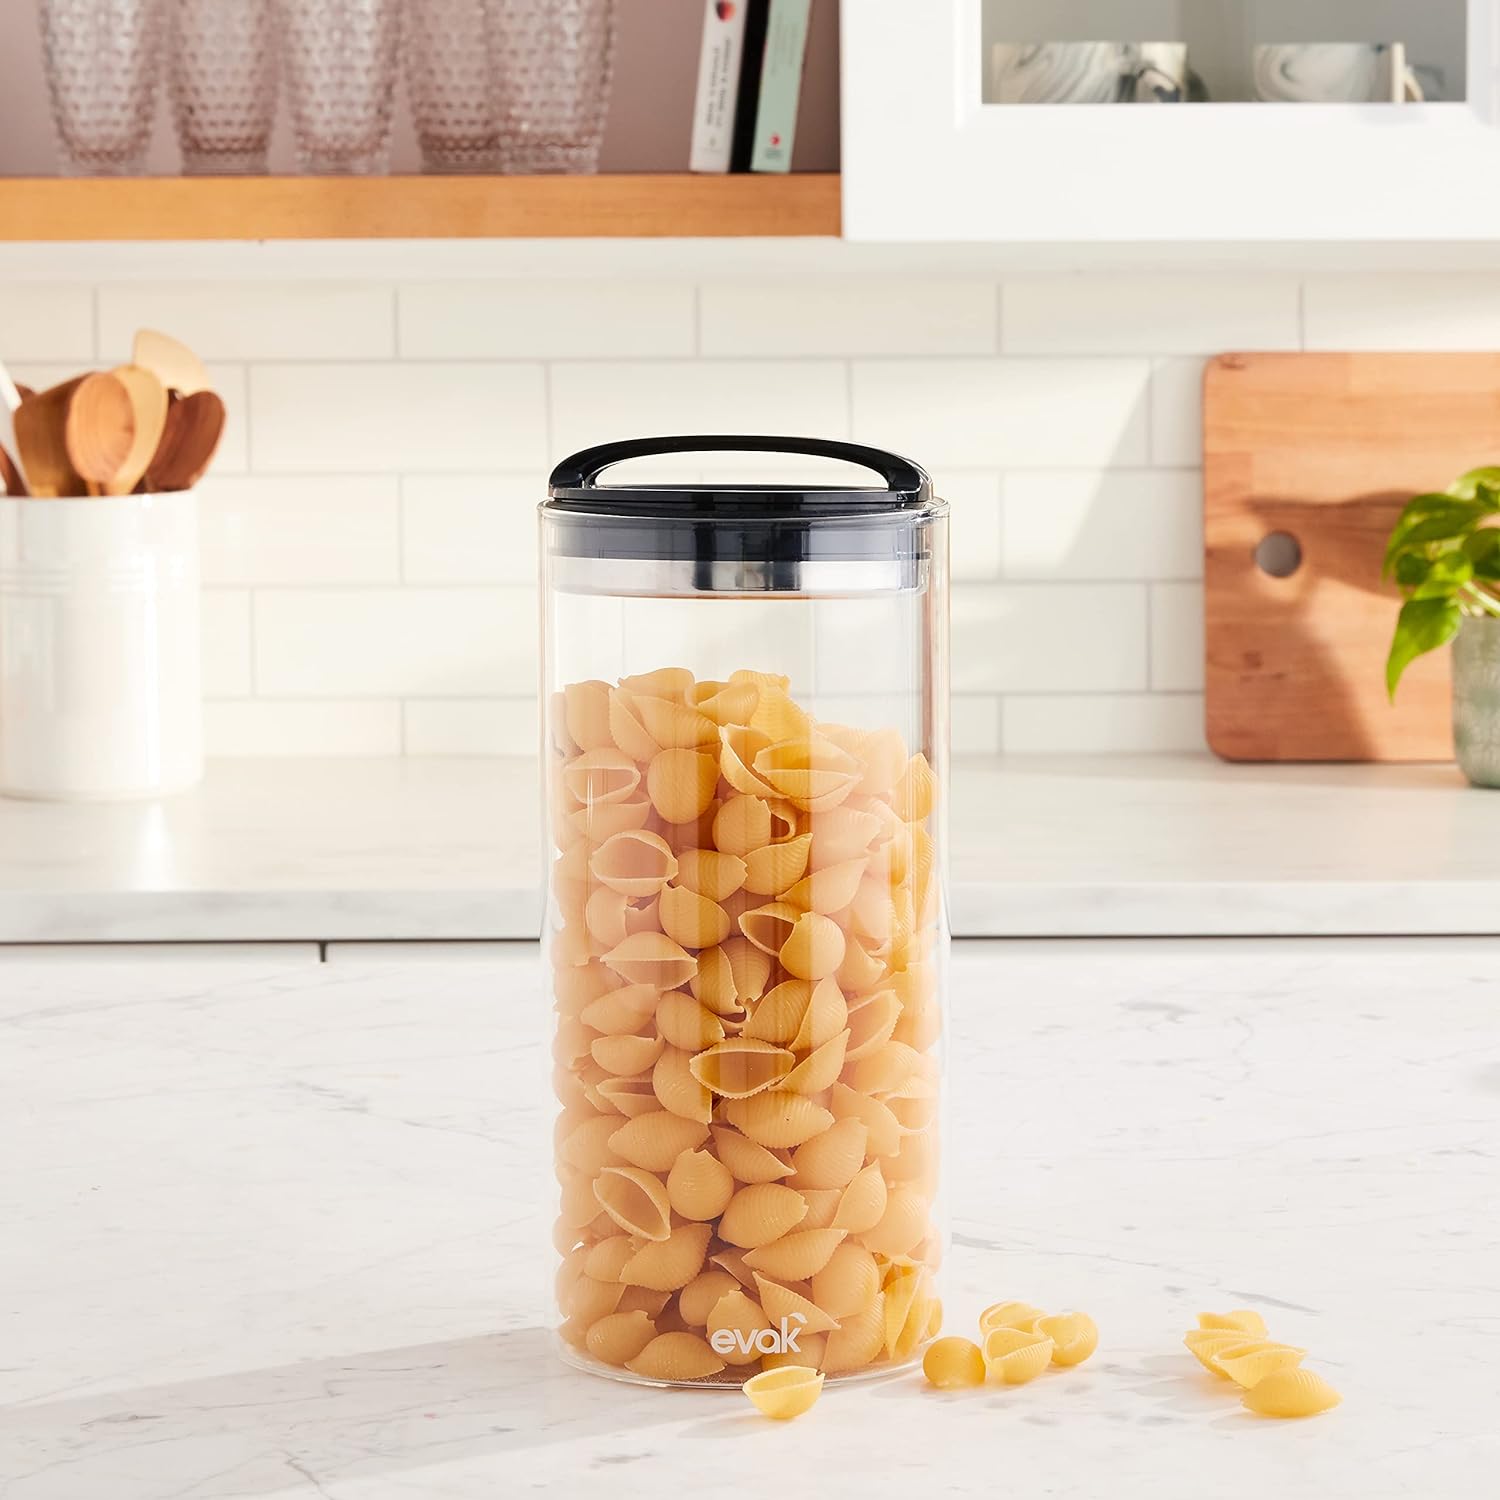 (These are $35 at Williams Sonoma, but $15 or MUCH less from us! These aren't some cheap plastic containers. They are premium glass and stainless steel, see additional video below where I demo them)  - Prepara EVAK Best PREMIUM Airtight Glass Storage Containers - LARGE 75 OUNCE SIZE (9.5 cups) - These unique containers keep the air out no matter how much food is in the container. Simply press down to the level of food left and BOOM.... FRESHNESS! Save tons of money keeping your food FRESH! AGAIN, price goes WAY down in your cart when you order 12! -  - Order 4 or more and SHIPPING IS FREE!